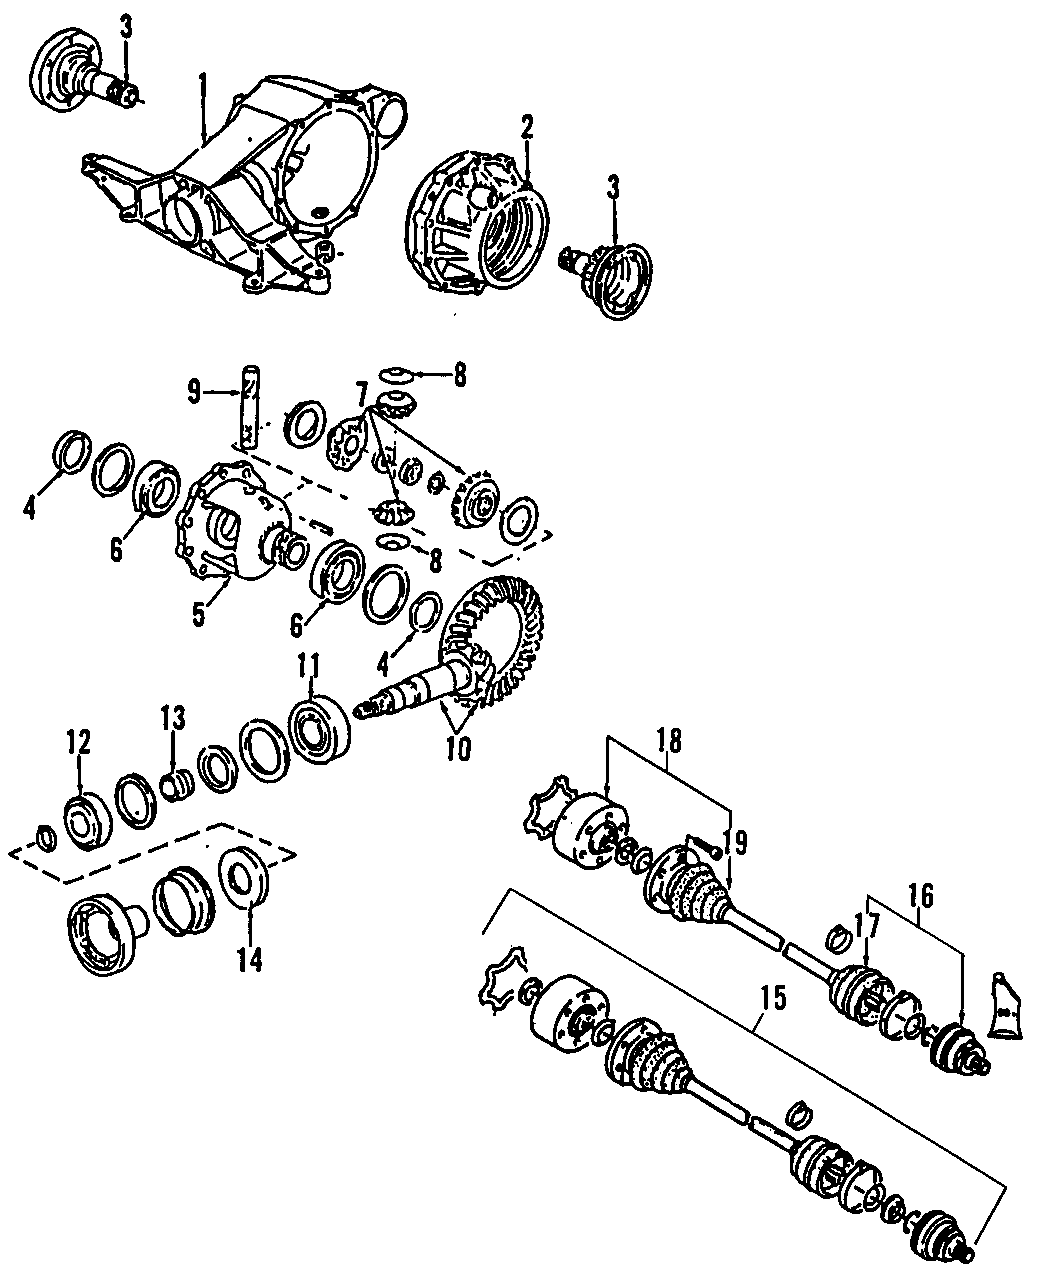 DRIVE AXLES. REAR AXLE. AXLE SHAFTS & JOINTS. DIFFERENTIAL. PROPELLER SHAFT.https://images.simplepart.com/images/parts/motor/fullsize/F208150.png